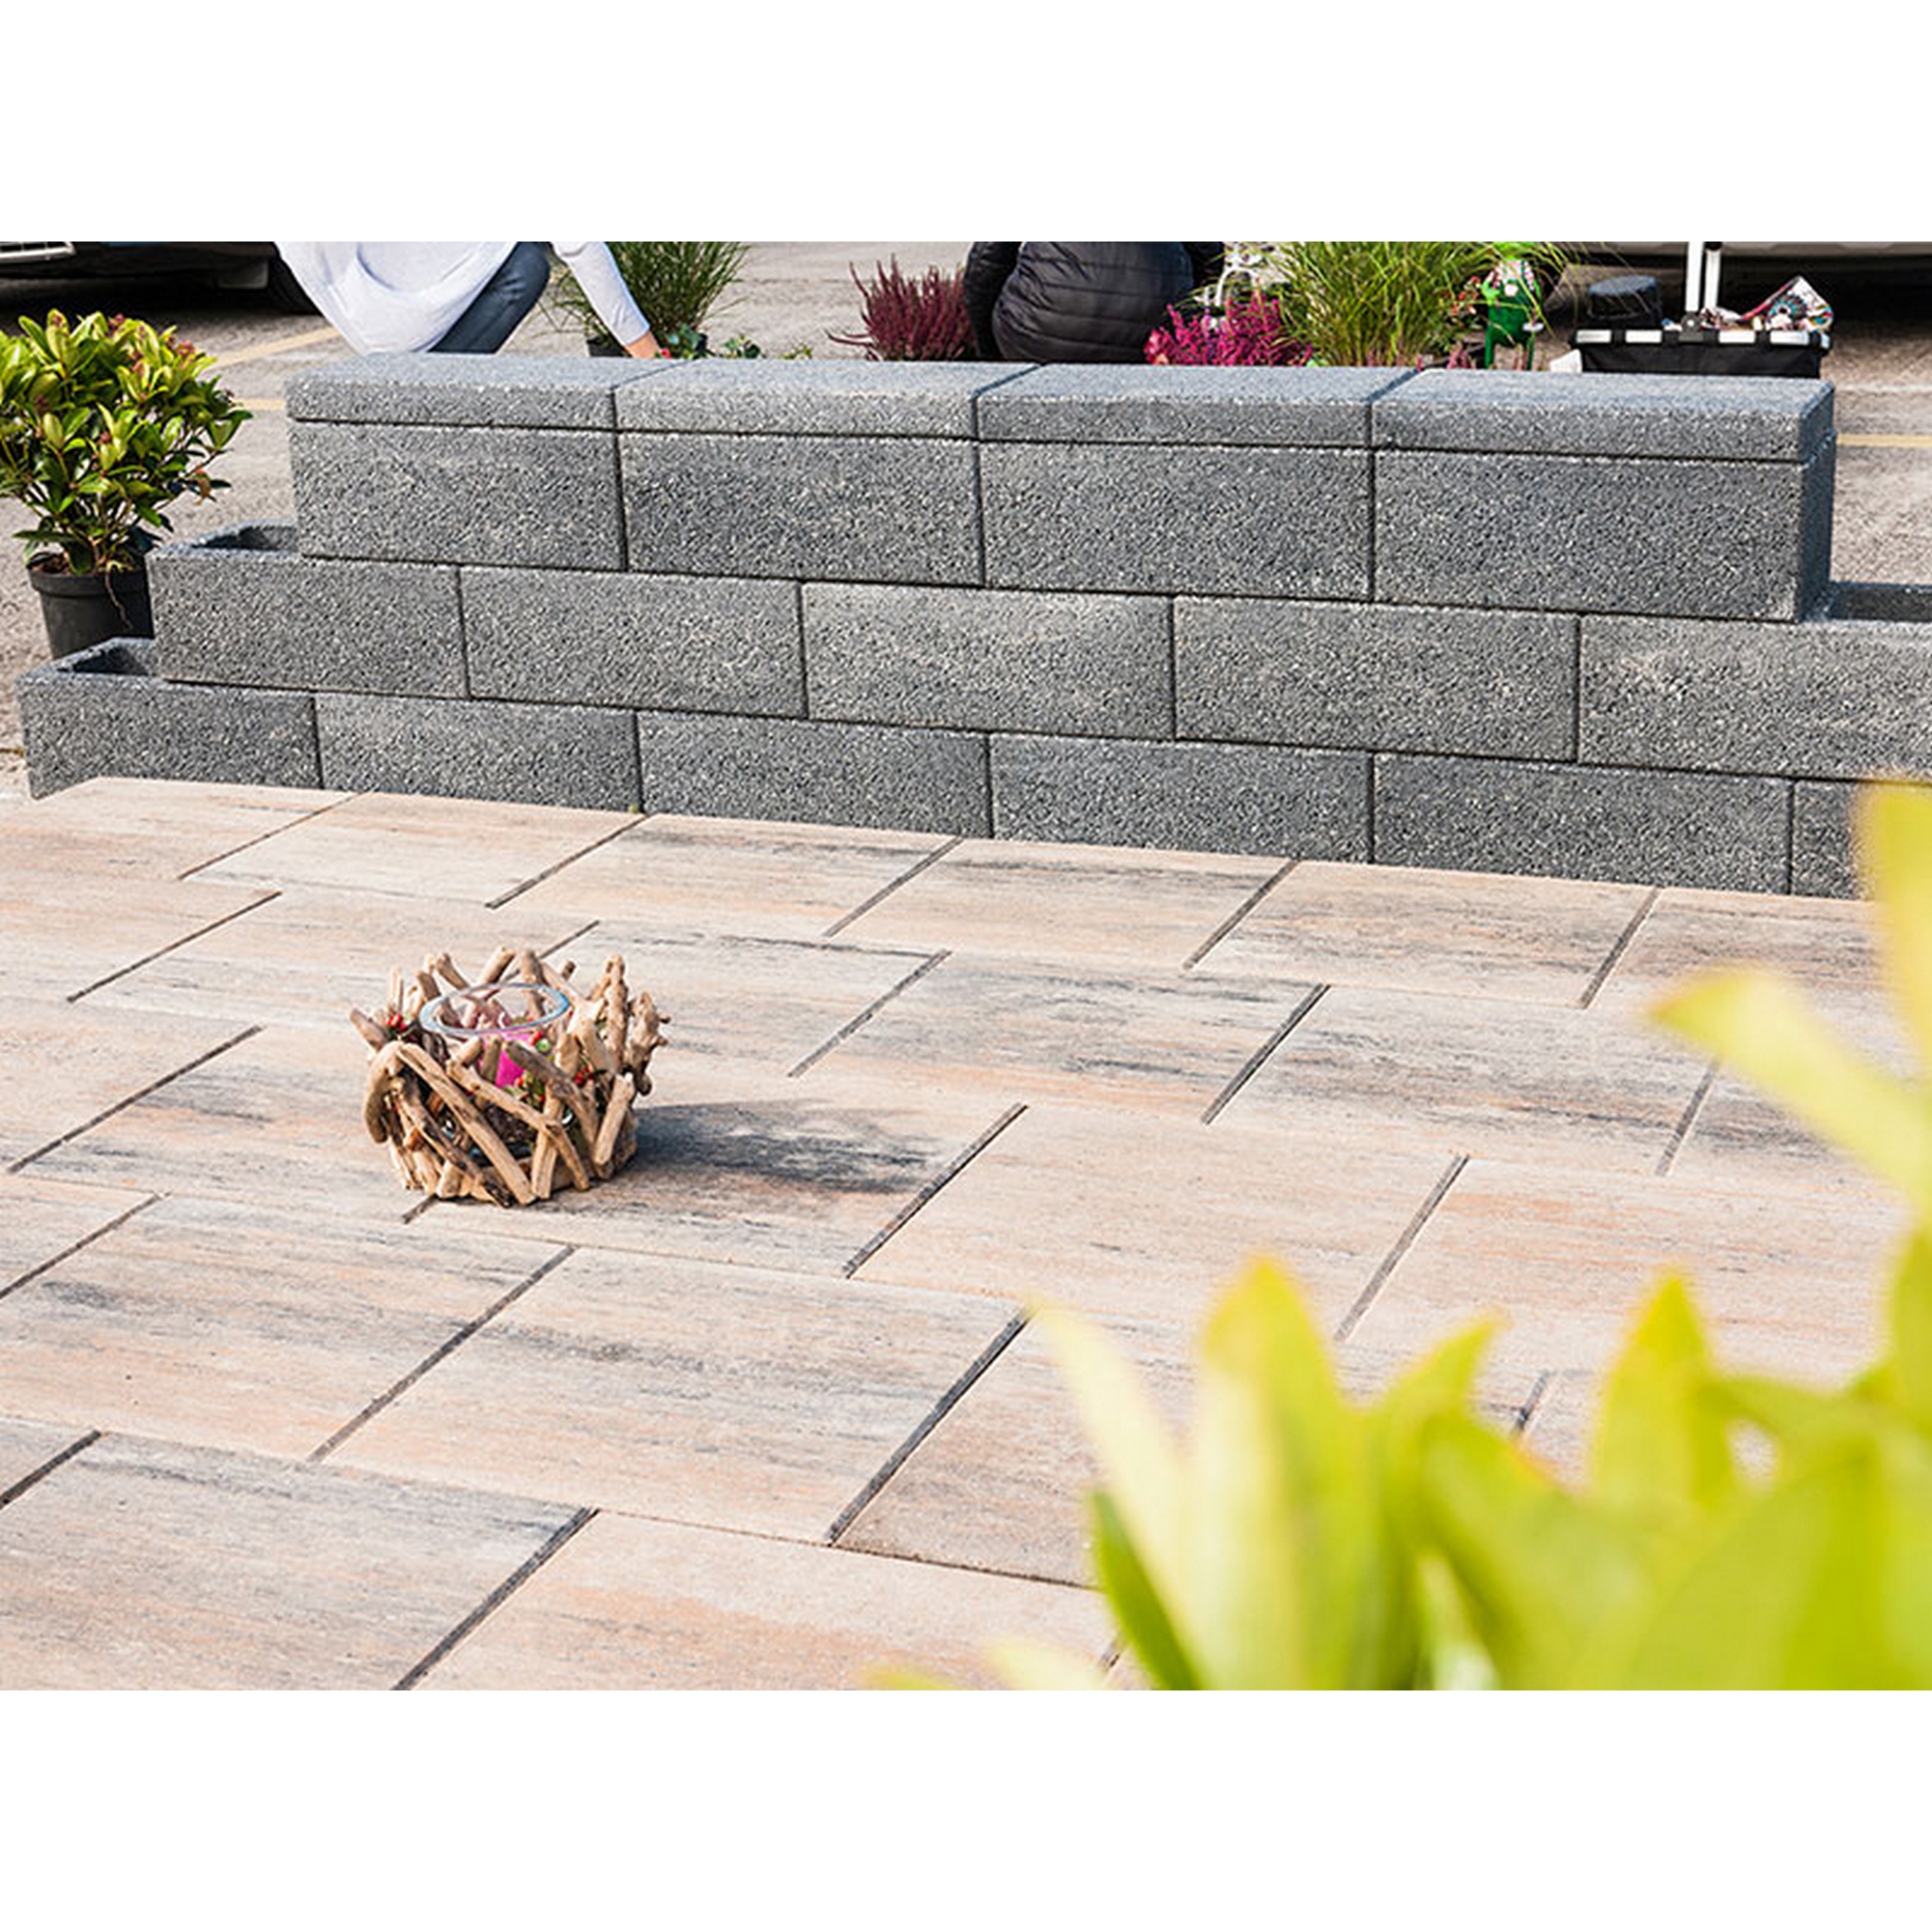 Mauerstein 'T-Wall Trend Eco' Beton grau 45 x 22,5 x 16,5 cm + product picture